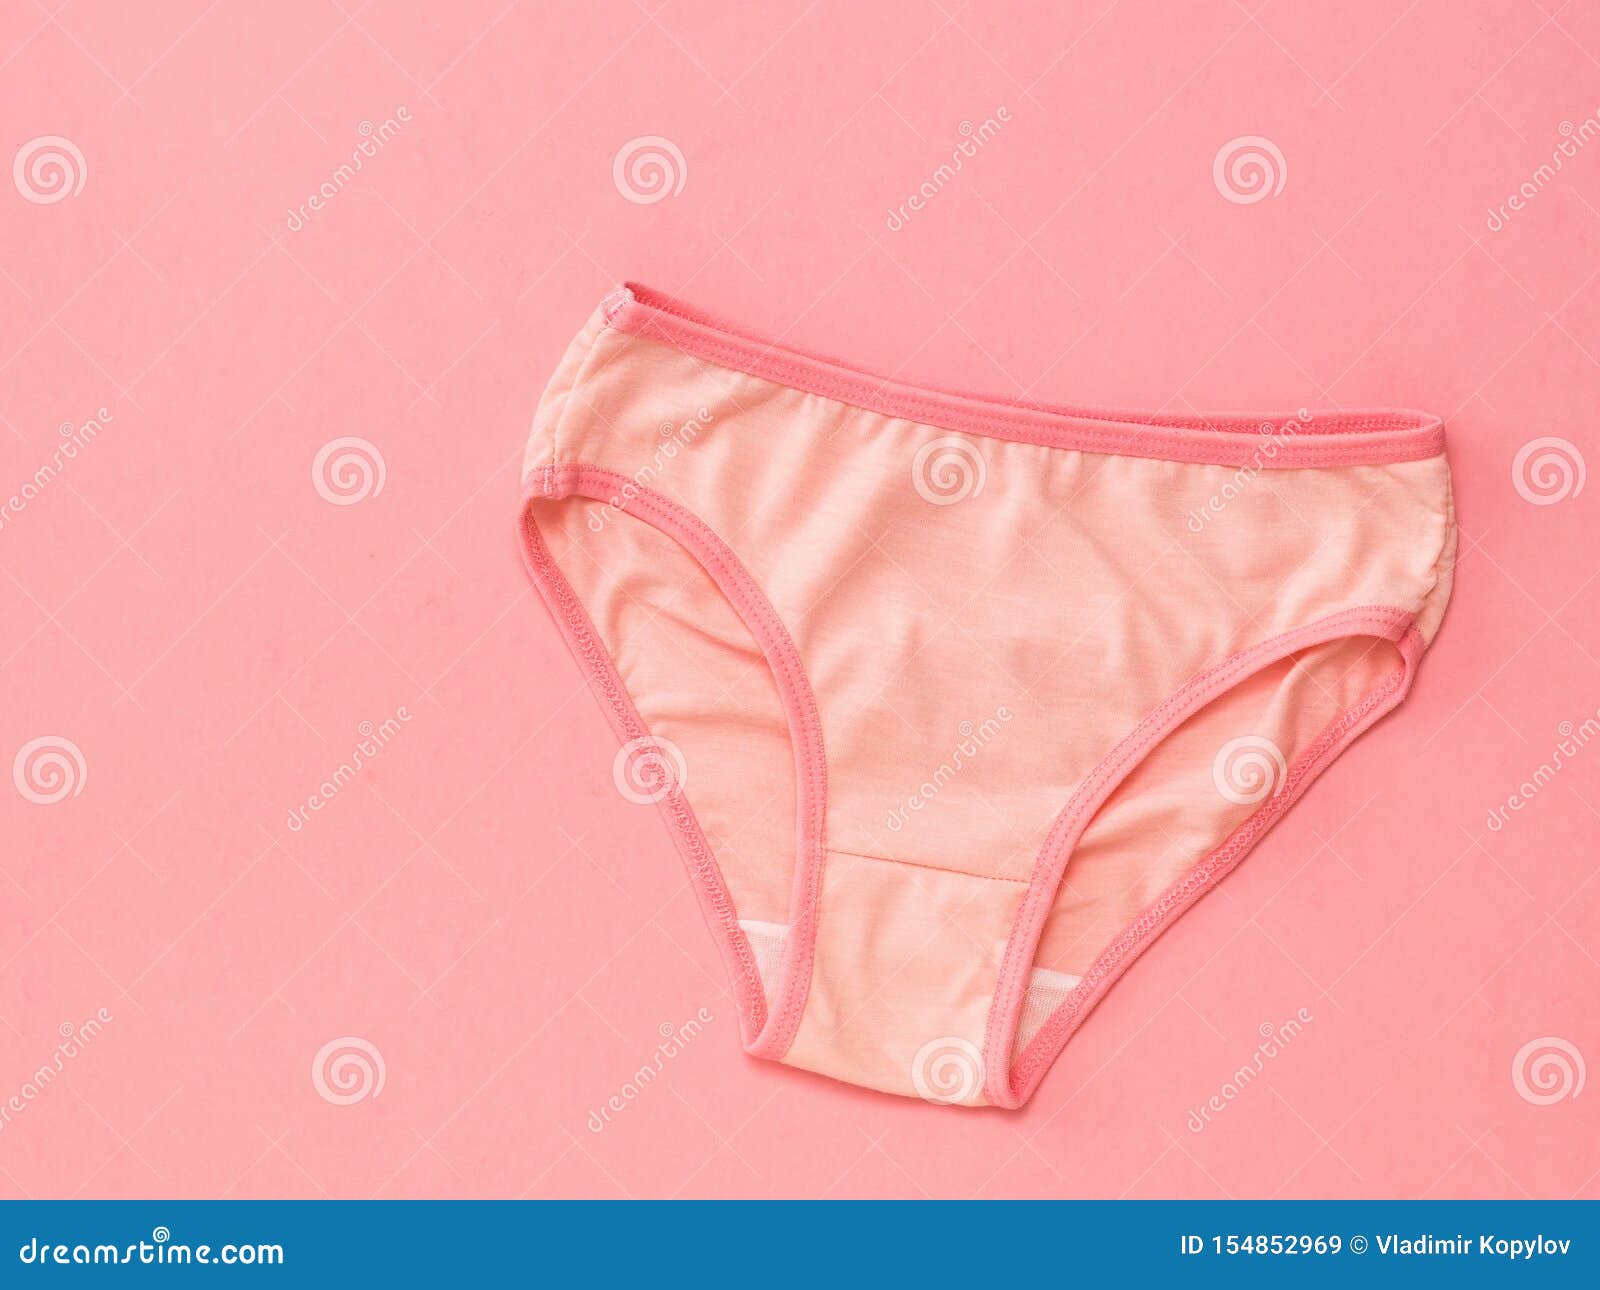 Pink Panties with Red Border on Pink Background. the Concept of